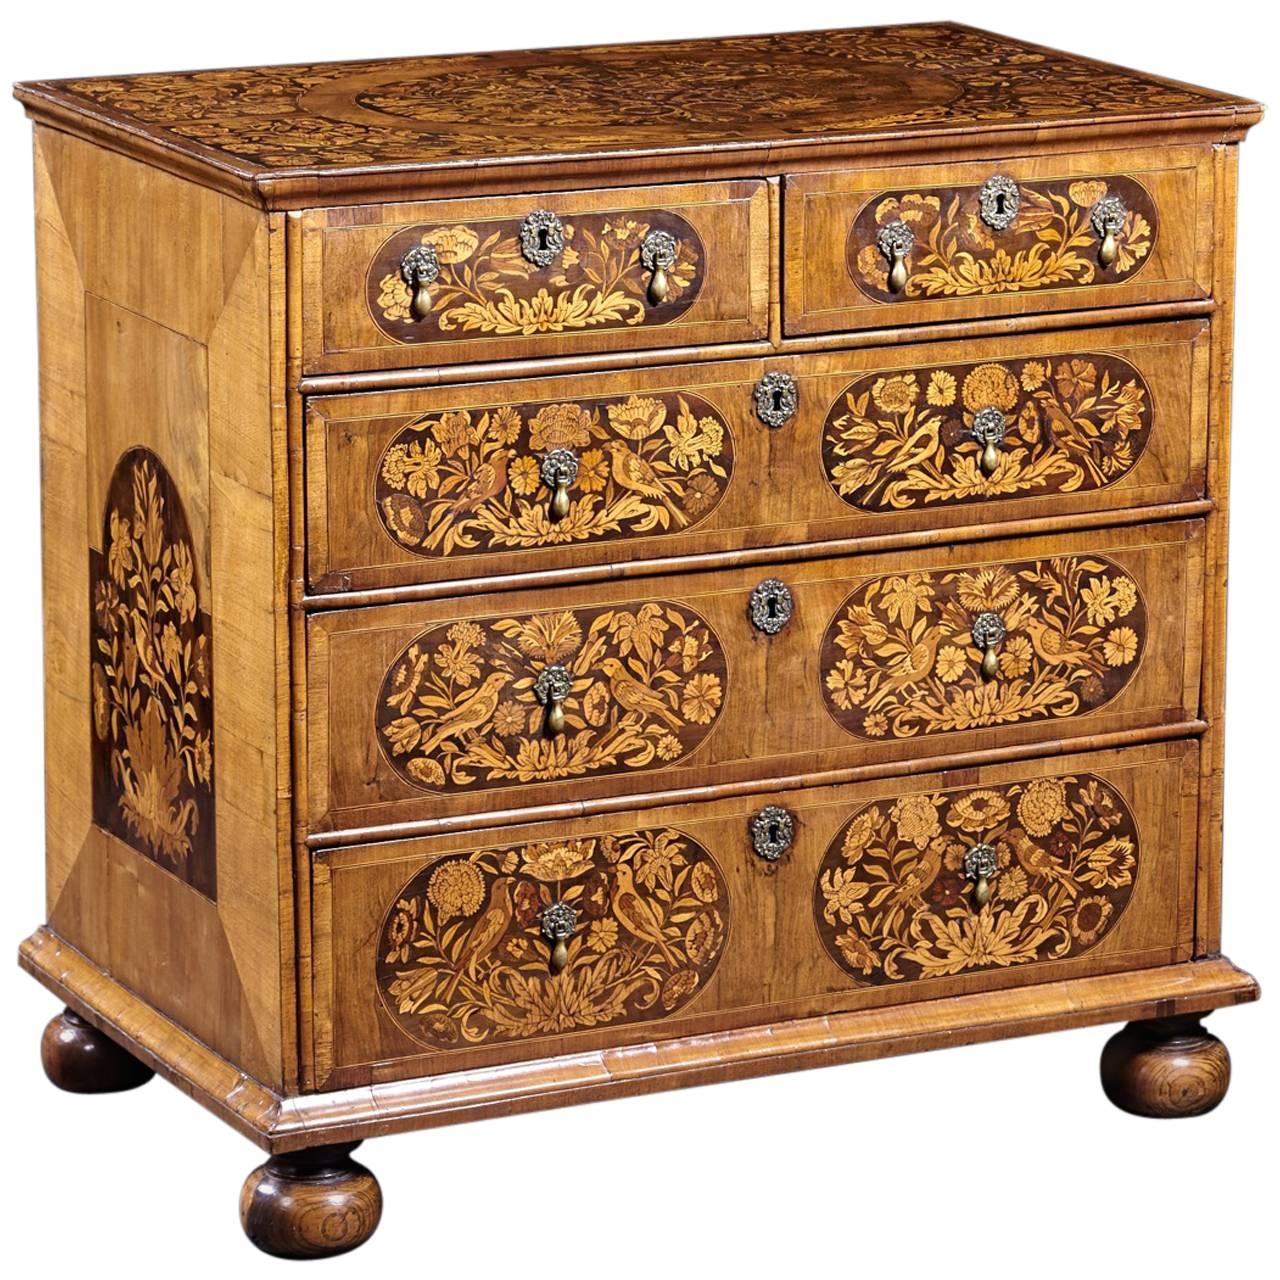 Fine English Walnut Marquetry Inlaid Chest with Provenance, circa 1680-1710 For Sale